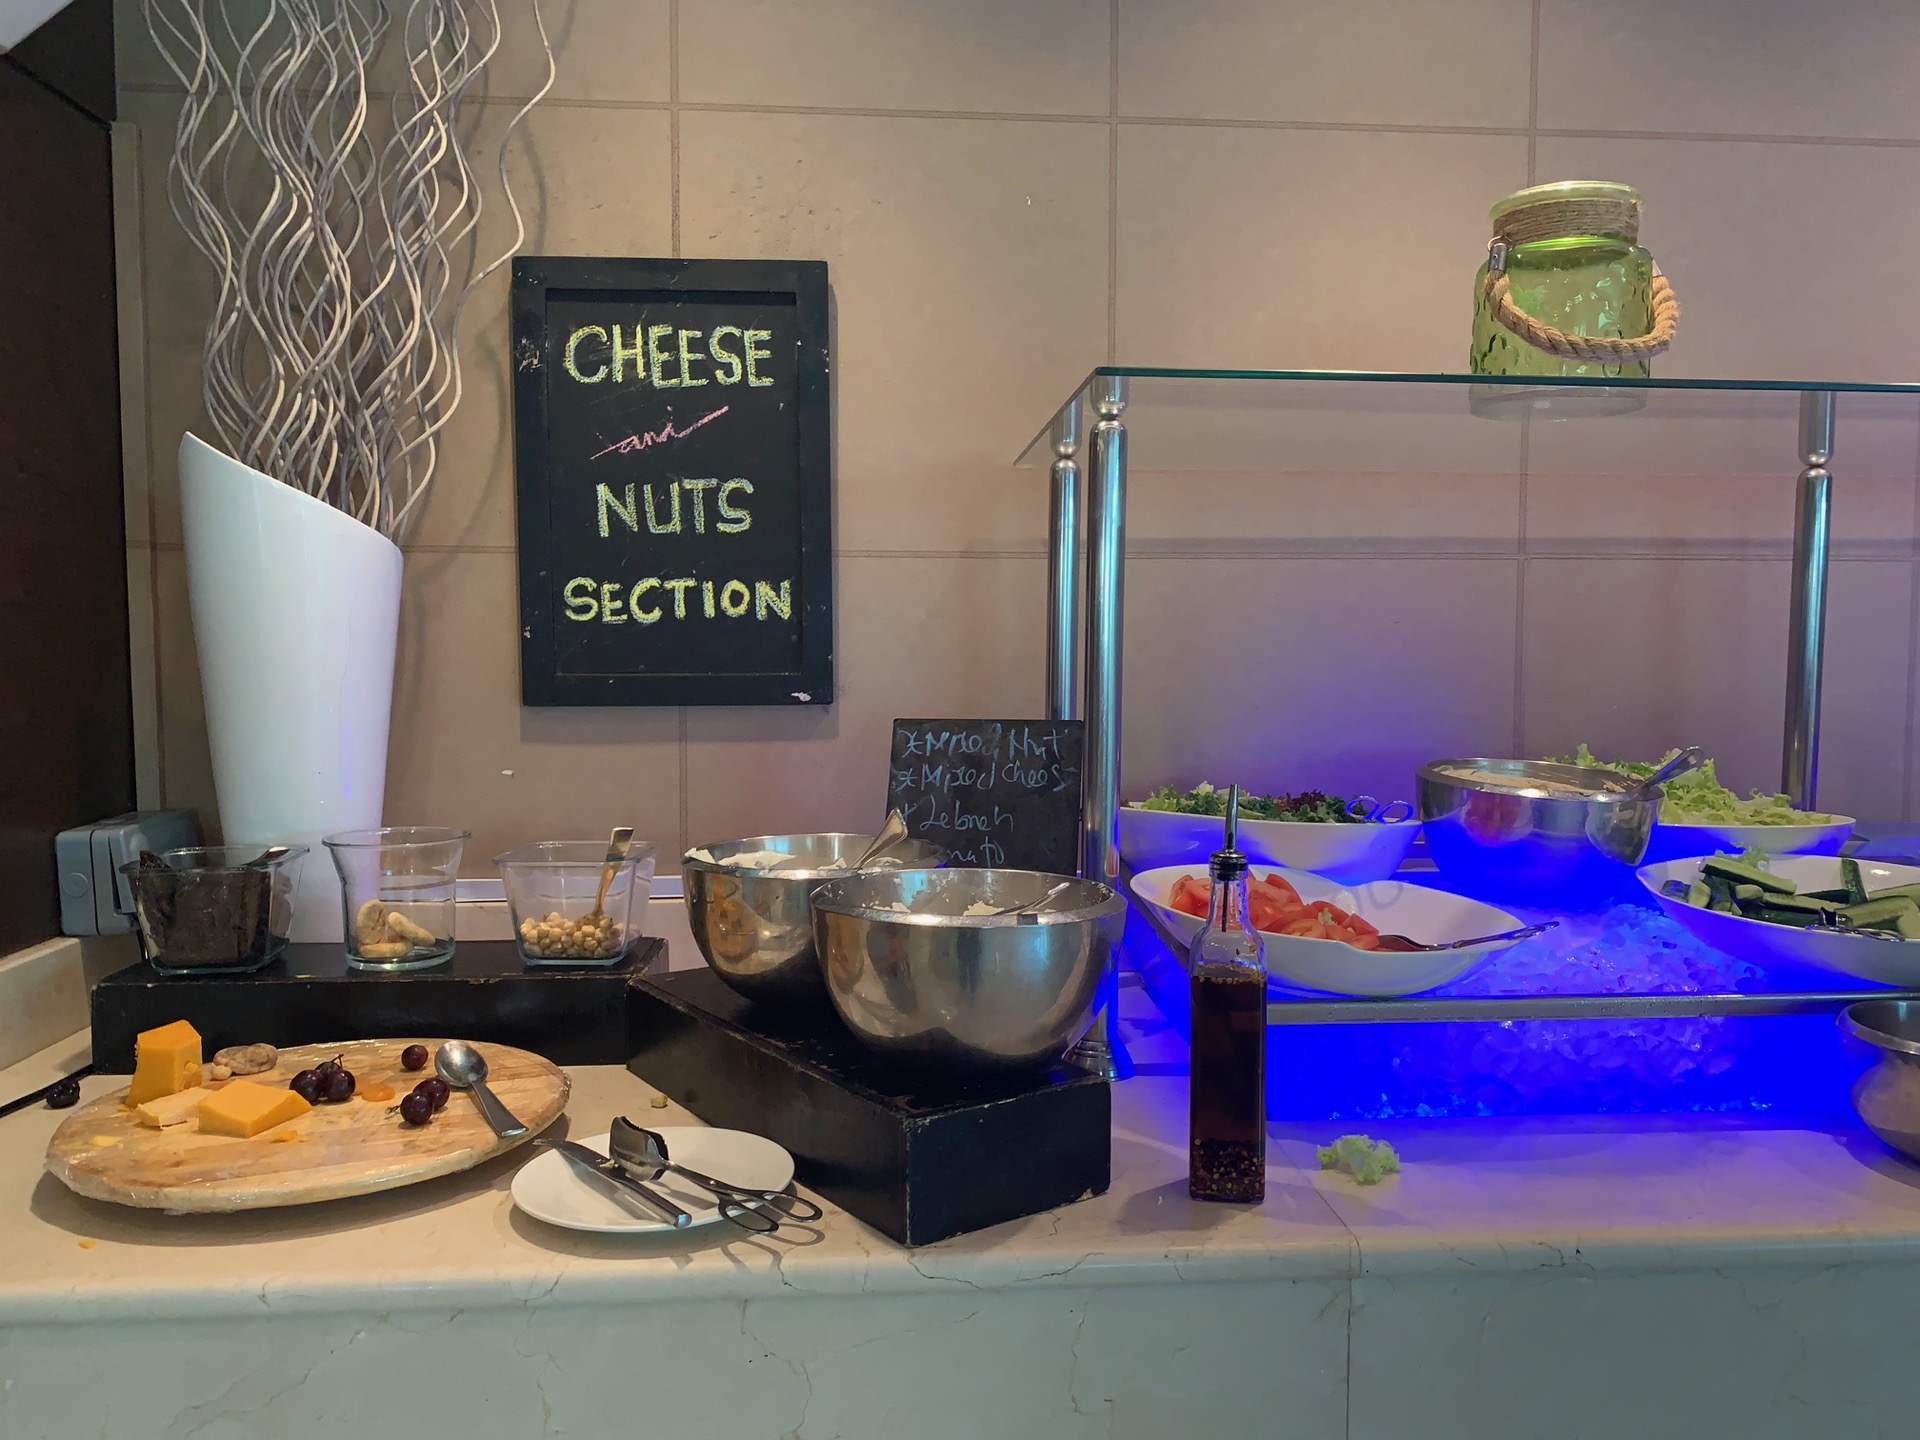 Cheese & Nuts Section